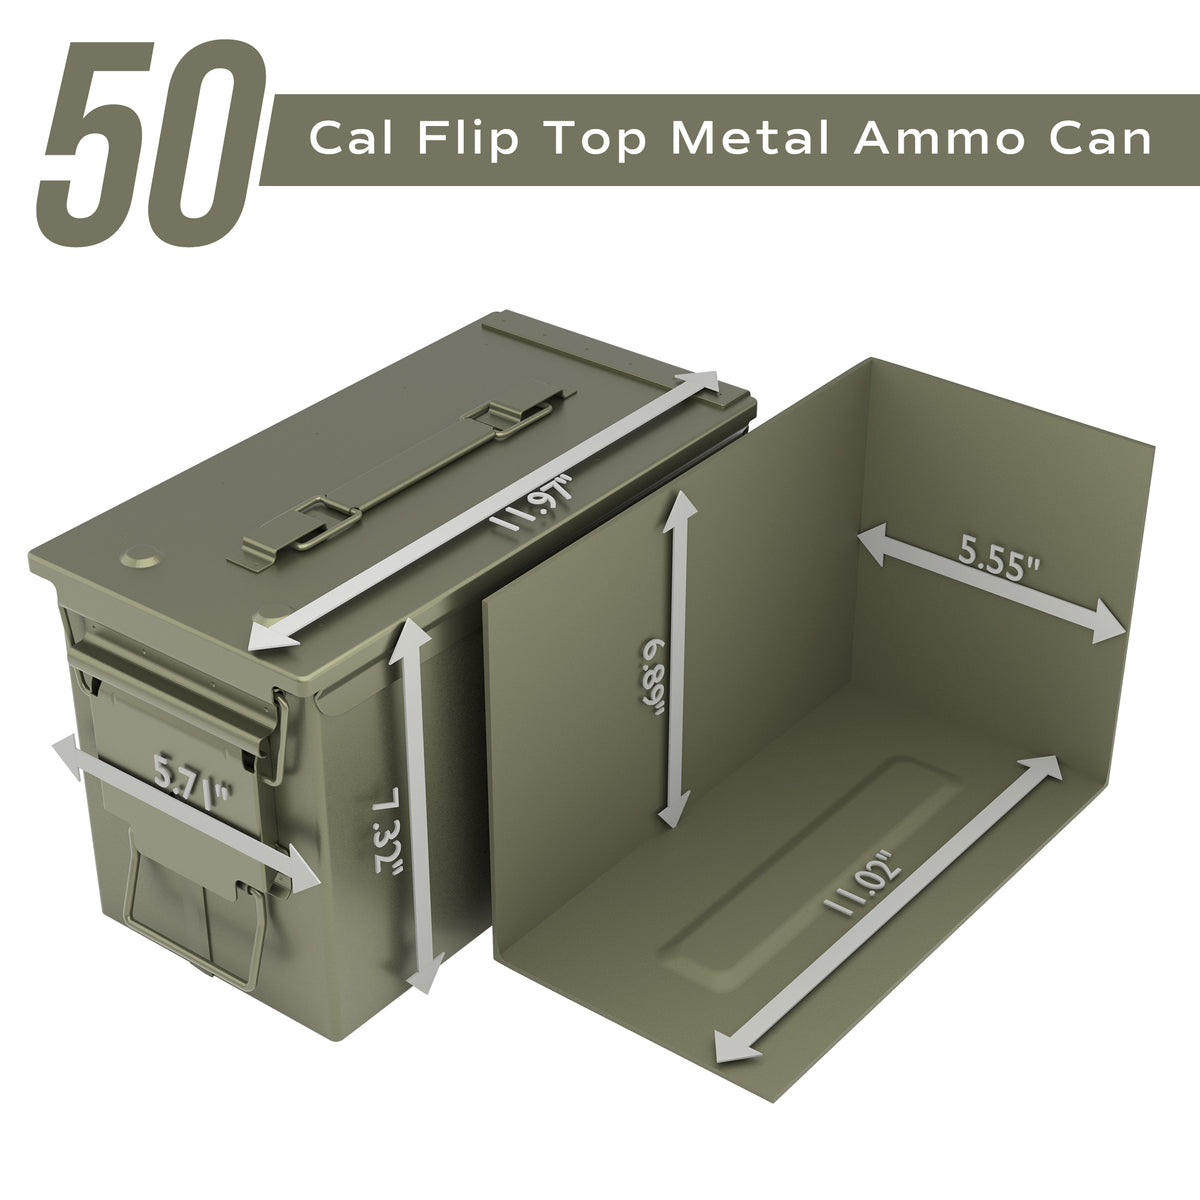 RPNB AM192 Metal Ammo Can .50 Cal Military Heavy Gauge Water Resistant Ammo Box Dimensions